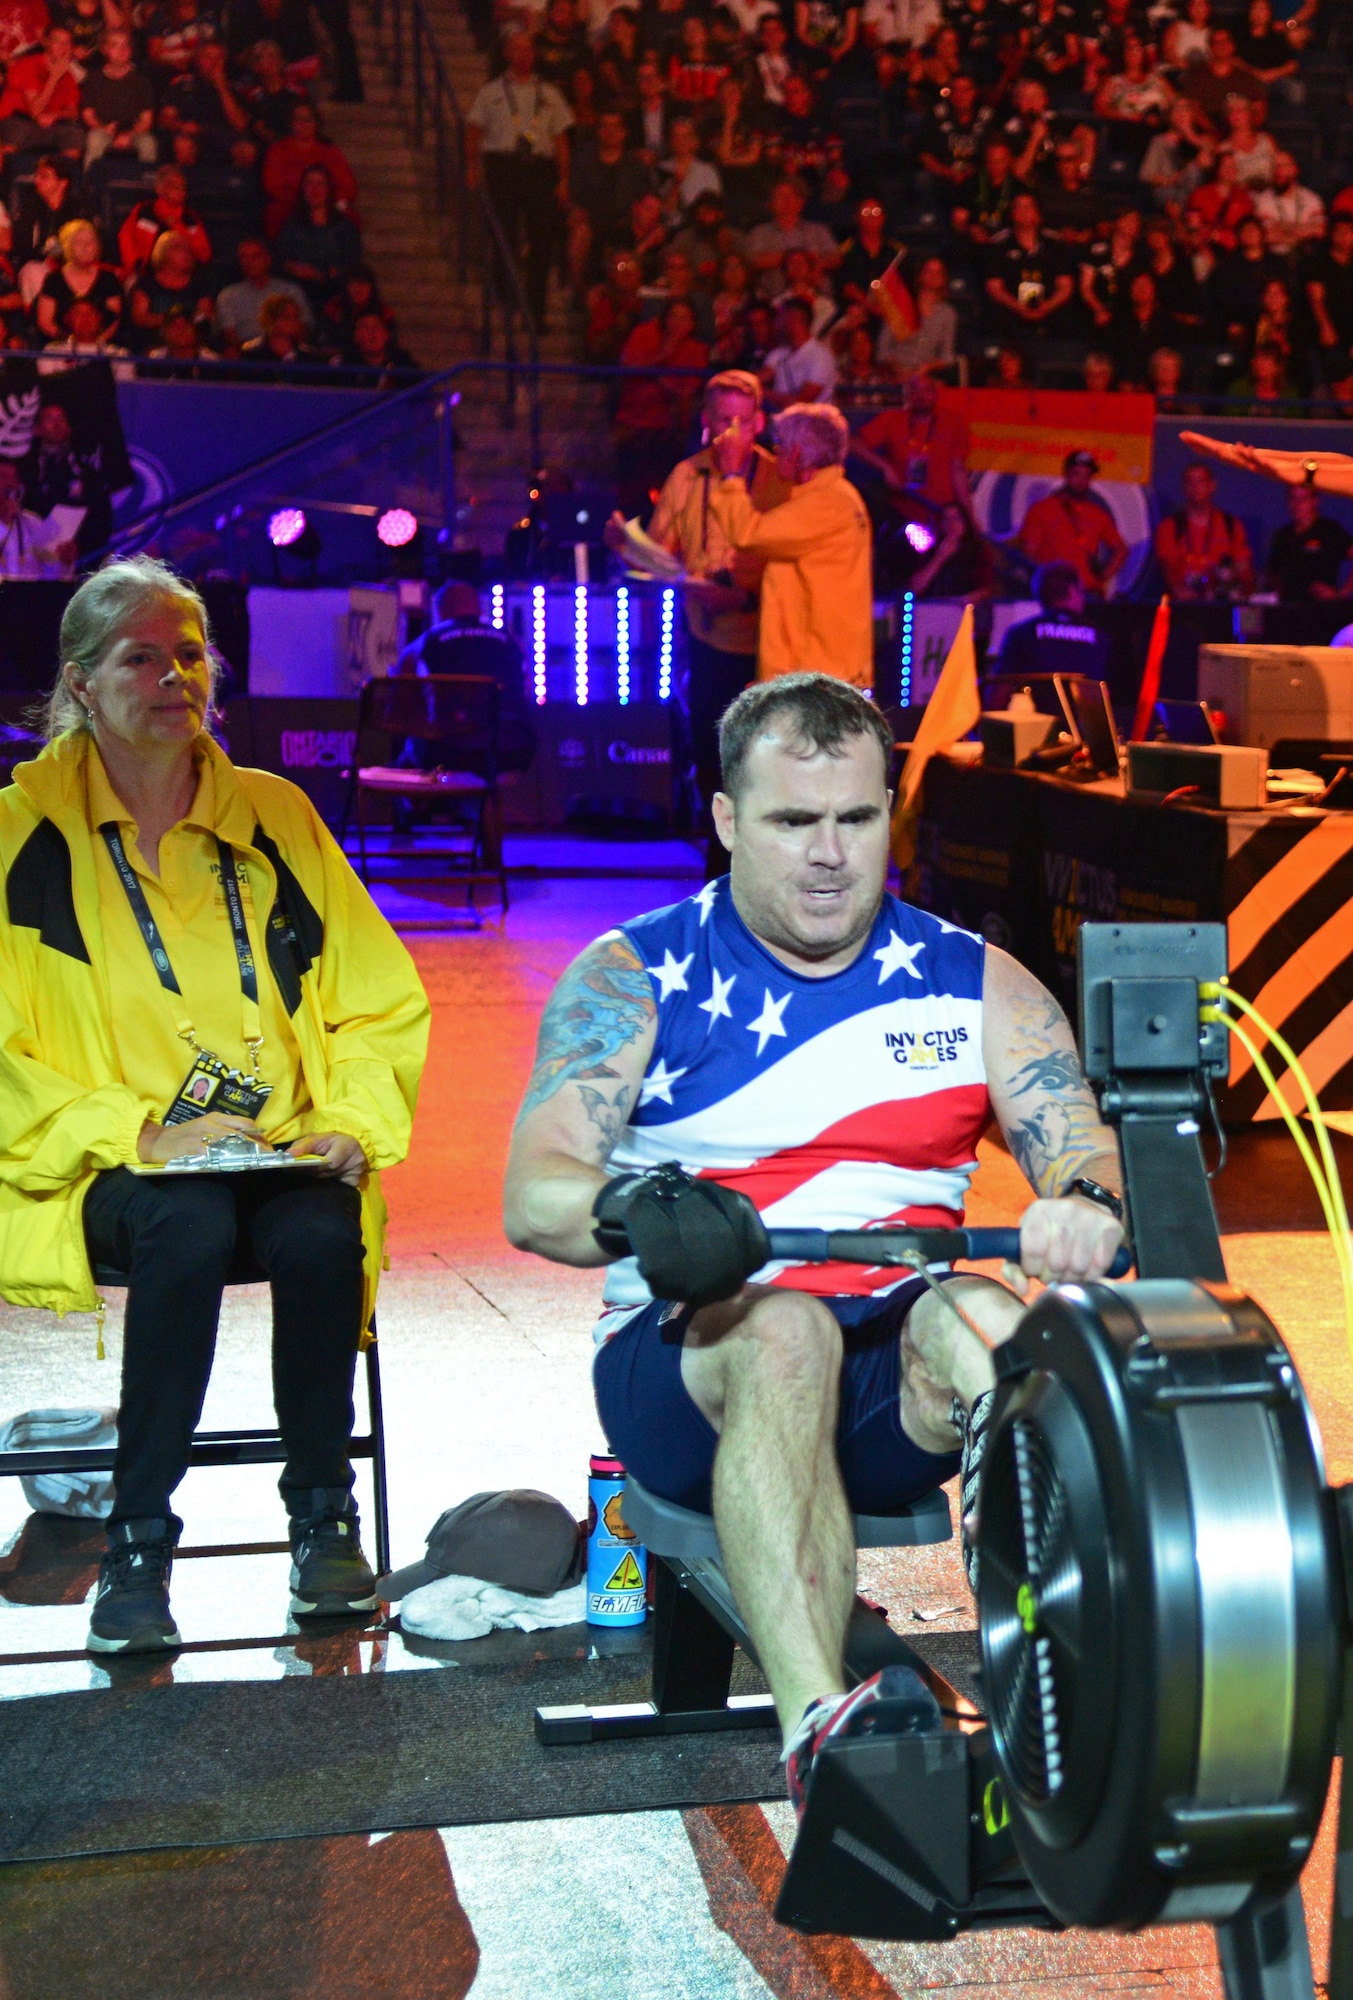 U.S. Air Force veteran Reese Hines, a former explosive ordnance disposal master sergeant, competes during the indoor rowing competition at the 2017 Invictus Games in Toronto, Canada, Sept. 26, 2017. Reese was injured while deployed to Afghanistan when an improvised explosive device was remotely detonated, and roughly 20 pounds of explosives activated less than 2 feet away from him. (U.S. Air Force photo by Staff Sgt. Alexx Pons)